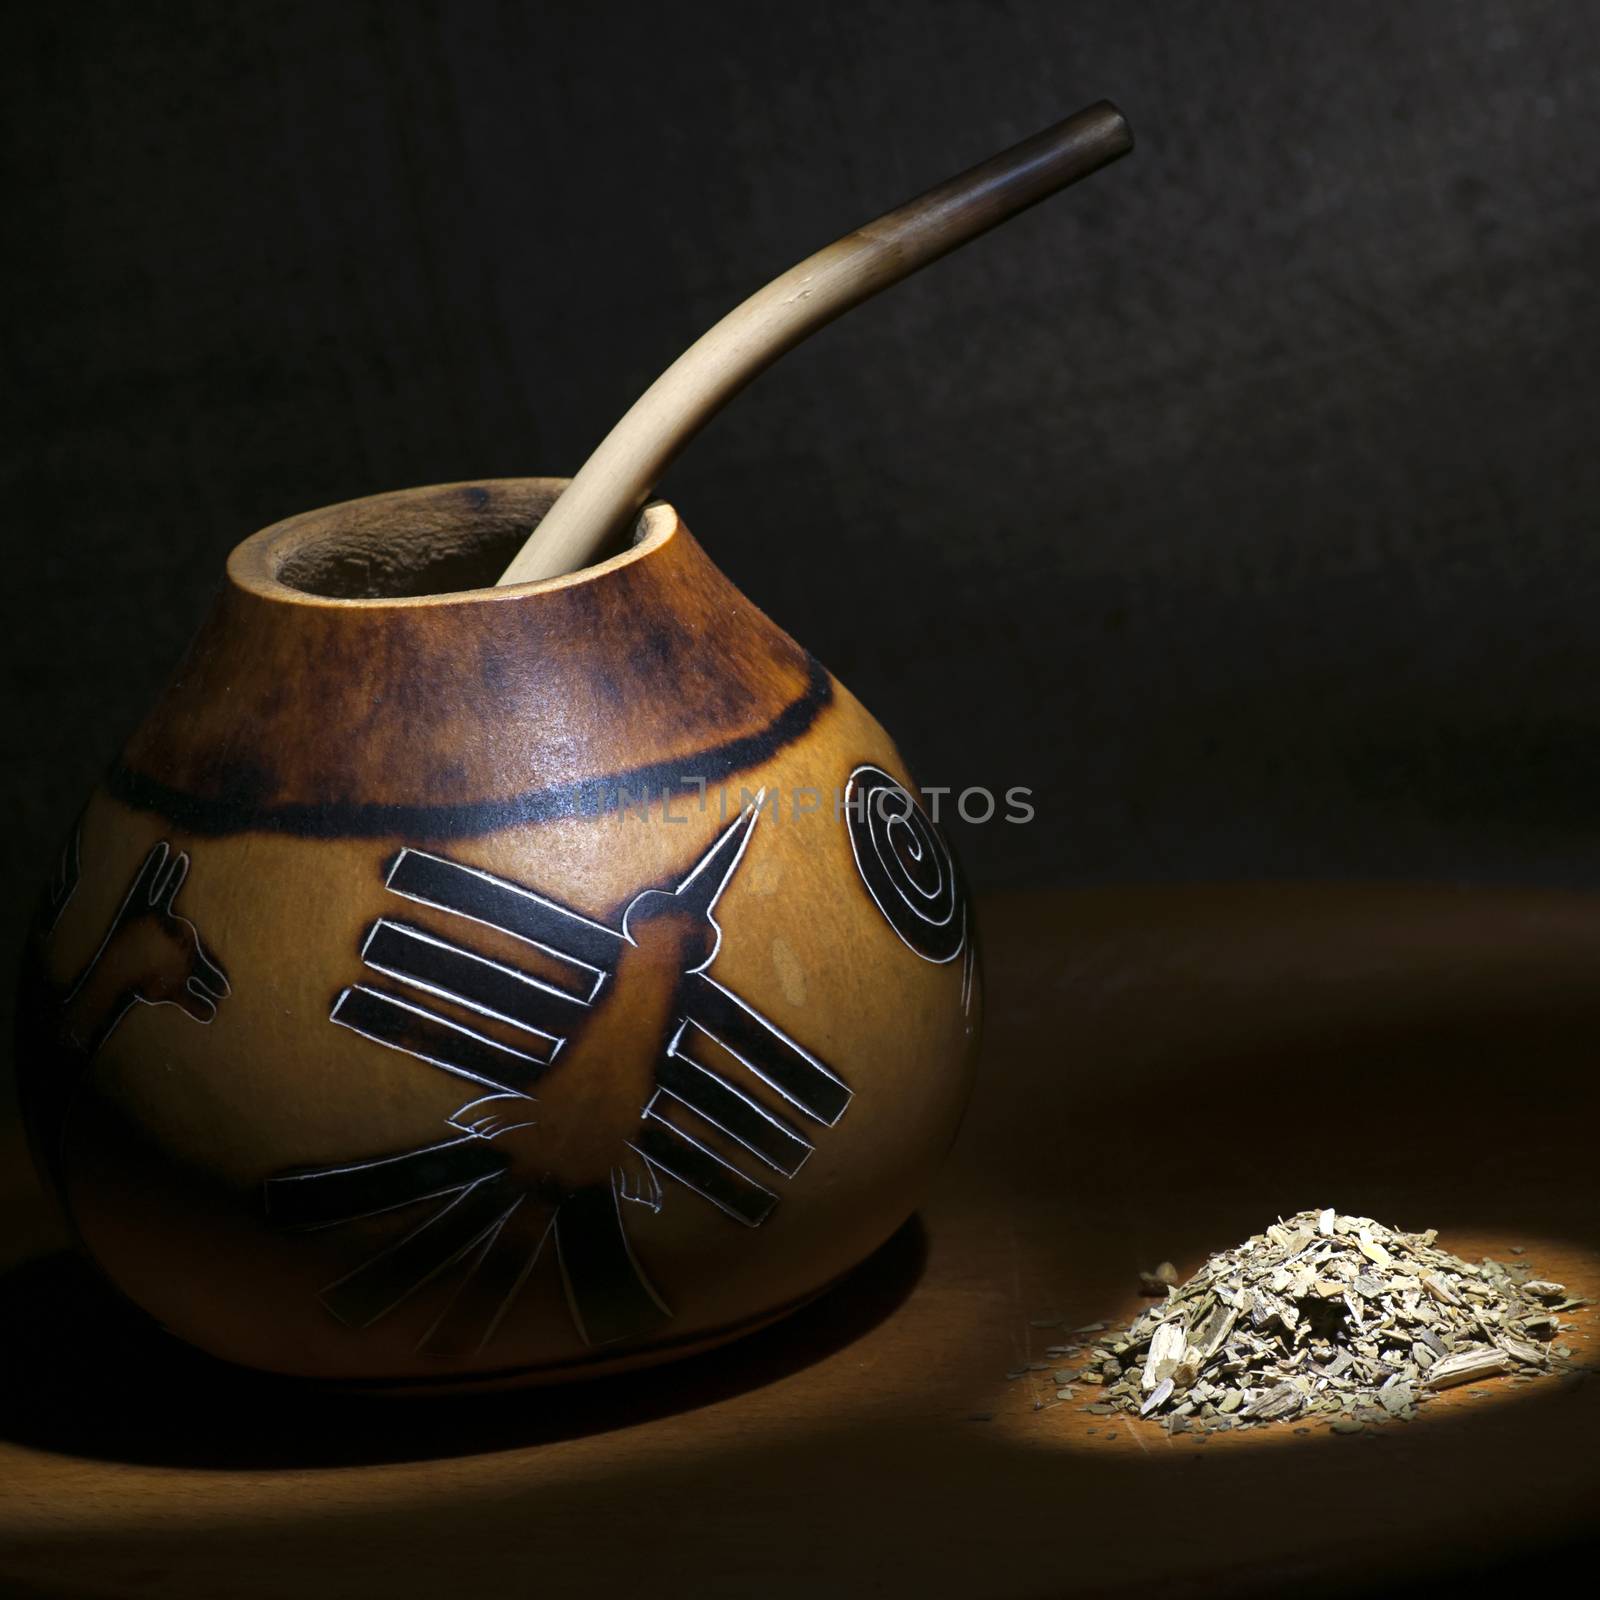 Traditional calabash gourd with bombilla and yerba mate by dred